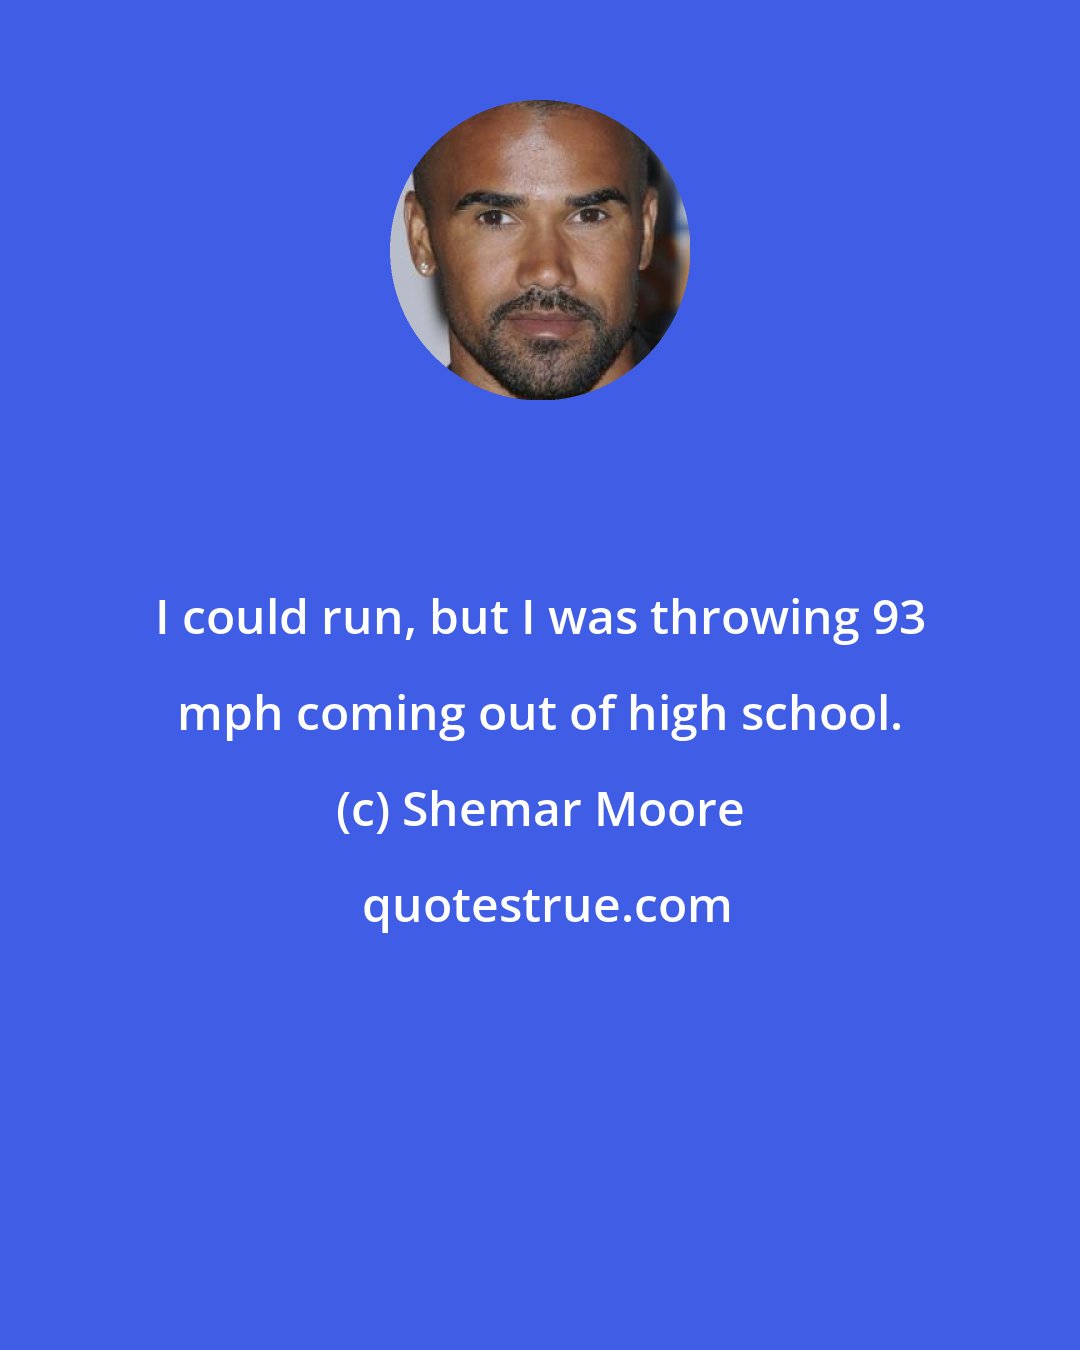 Shemar Moore: I could run, but I was throwing 93 mph coming out of high school.